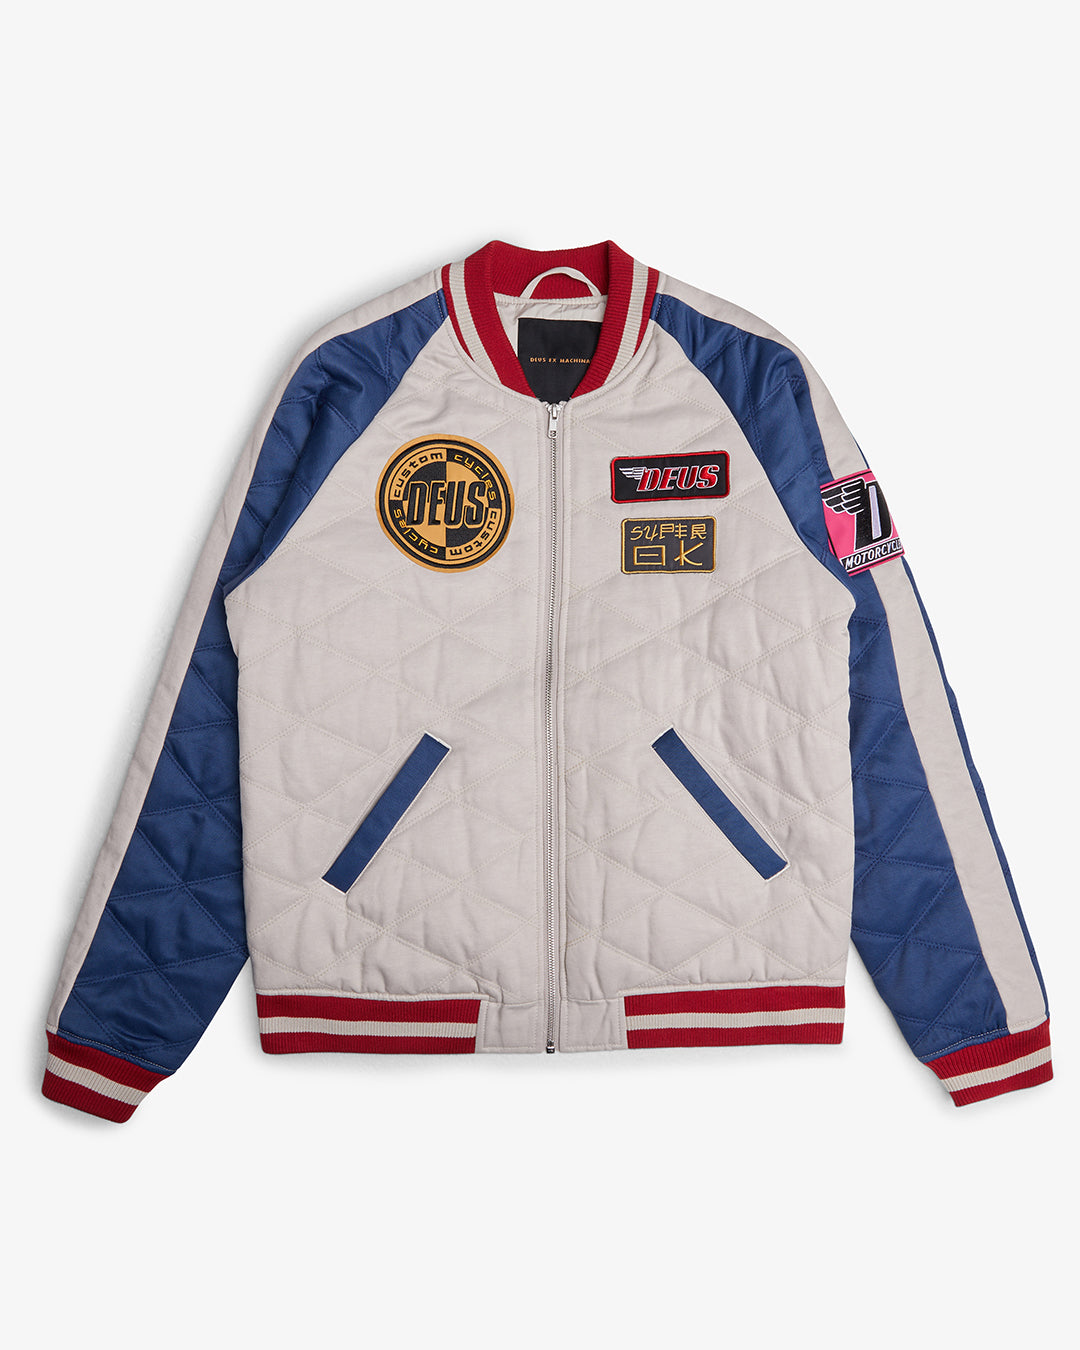 Image of Supporters Jacket